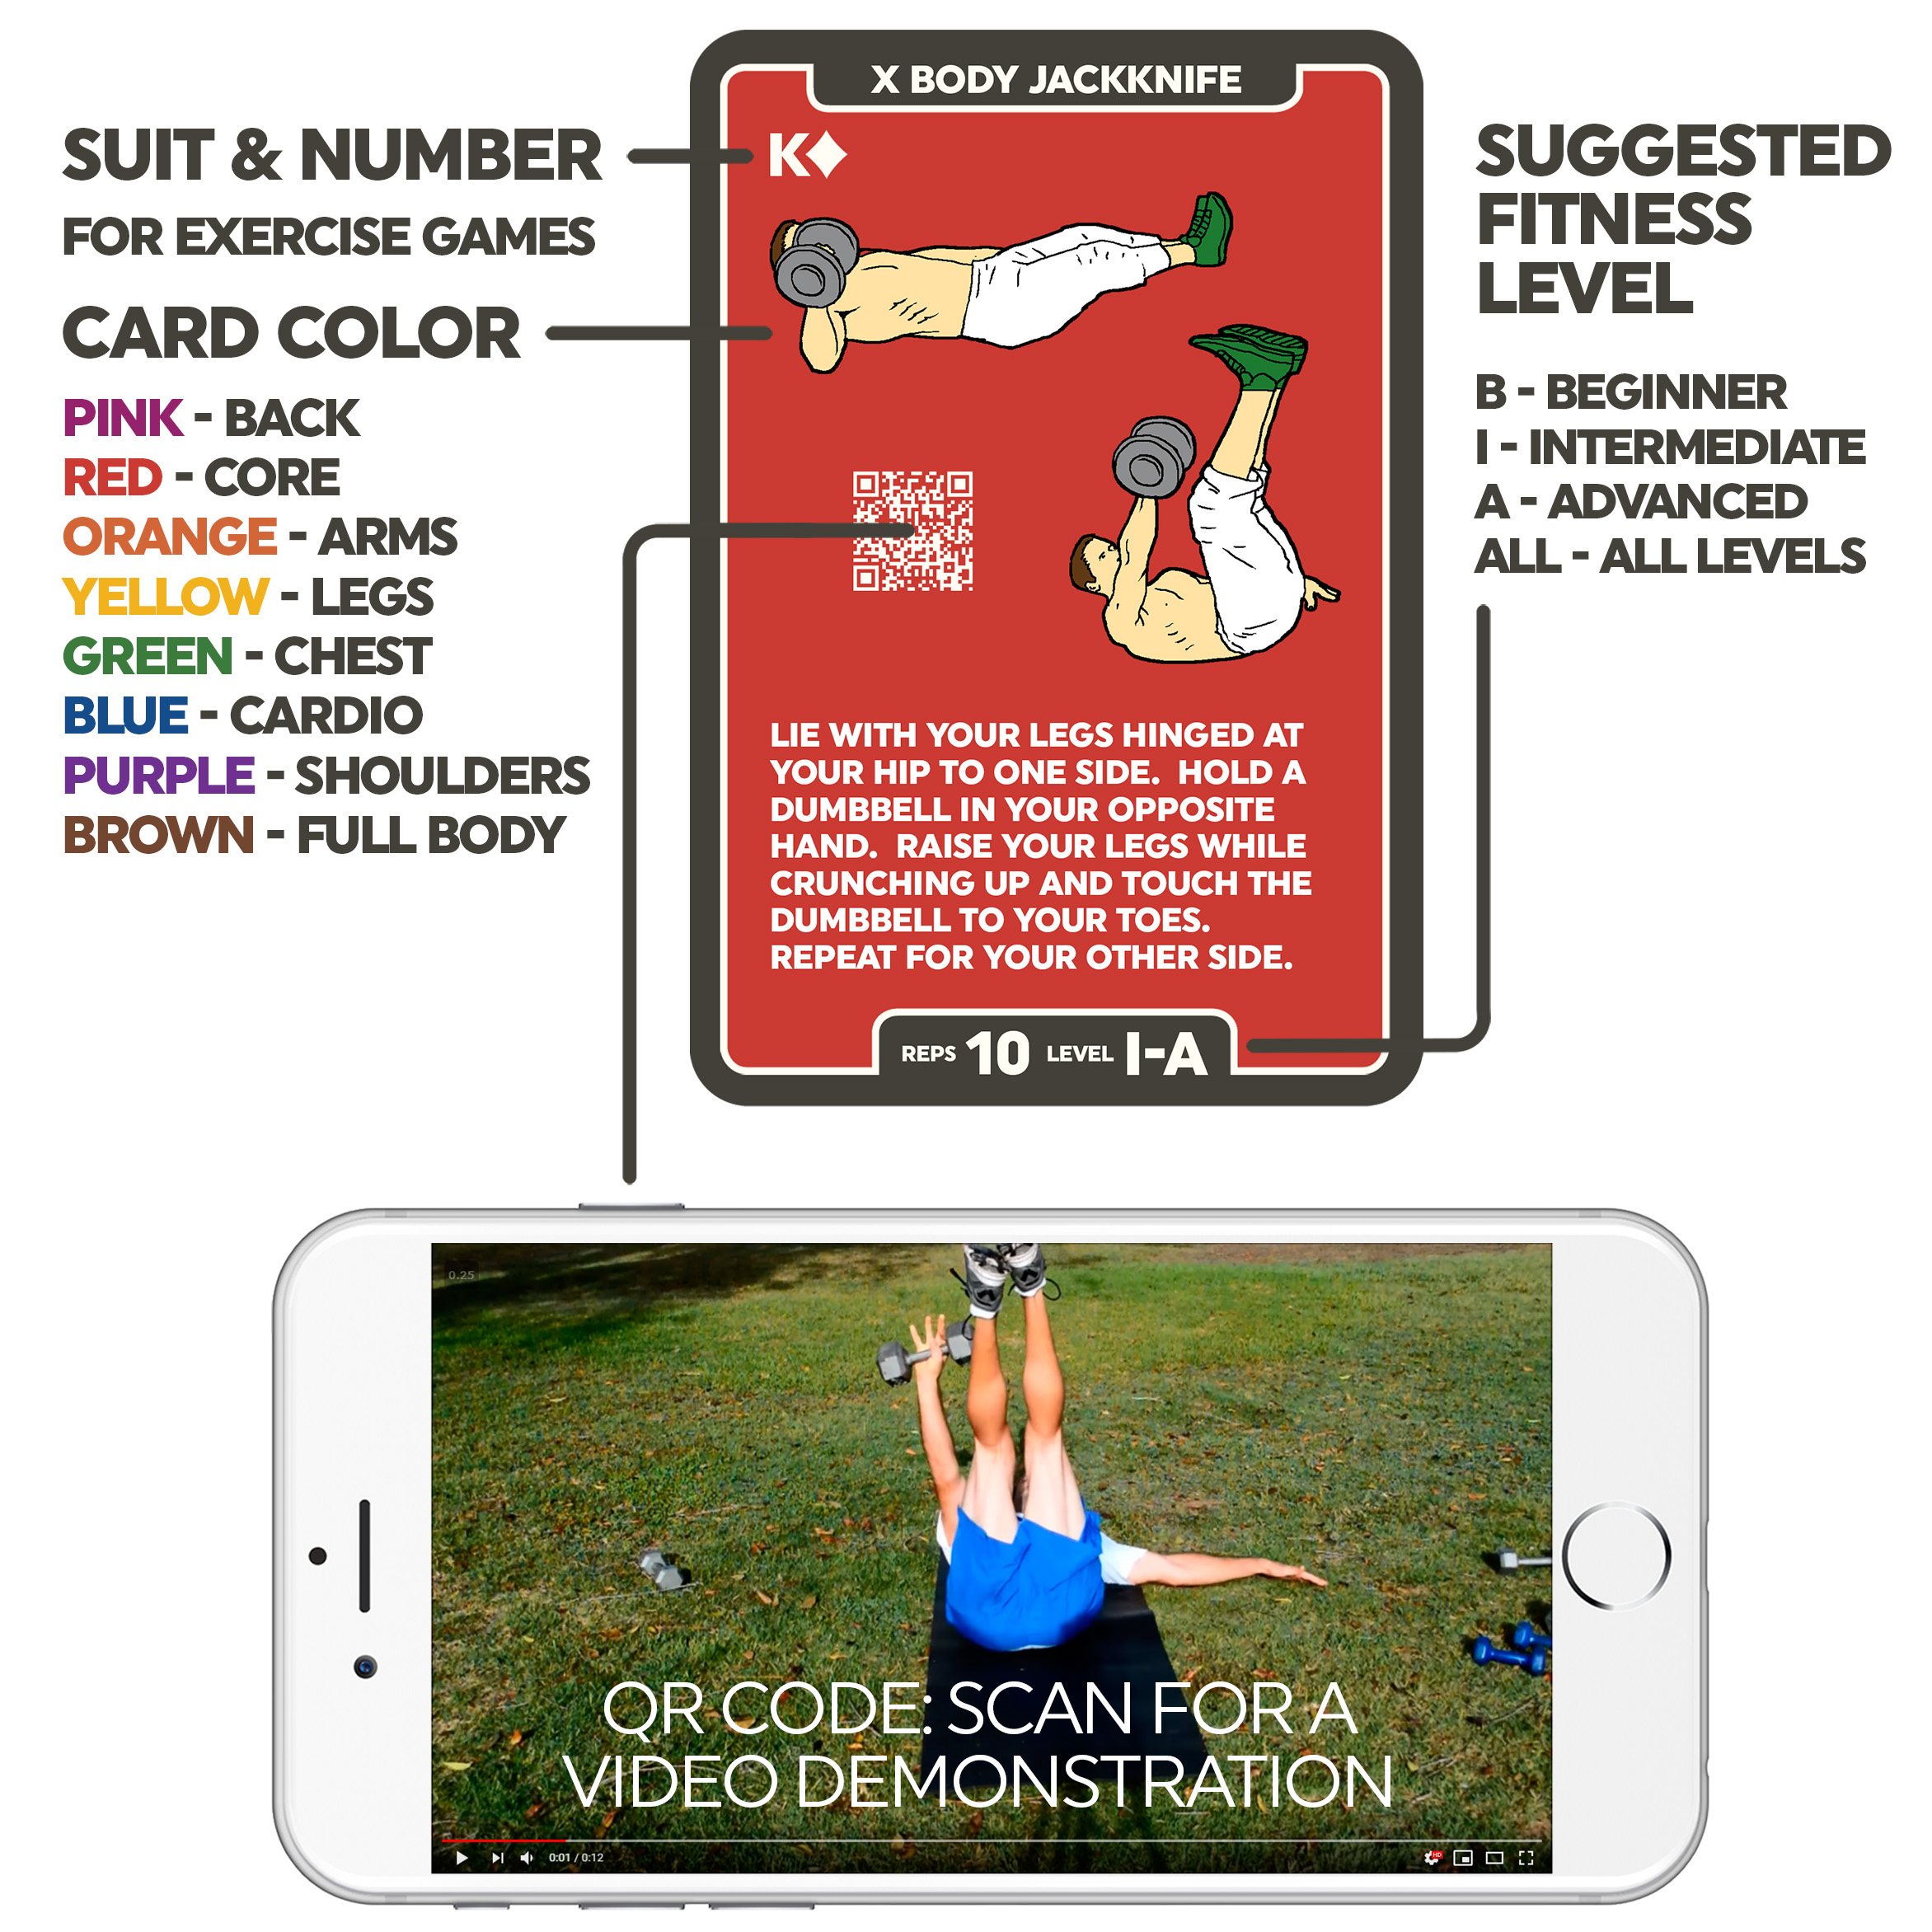 Stack 52 Dumbbell Exercise Cards. Dumbbell Workout Playing Card Game. Video Instructions Included. Perfect for Training with Adjustable Dumbbell Free Weight Sets and Home Gym Fitness. (2019 Base Deck) - image 5 of 6